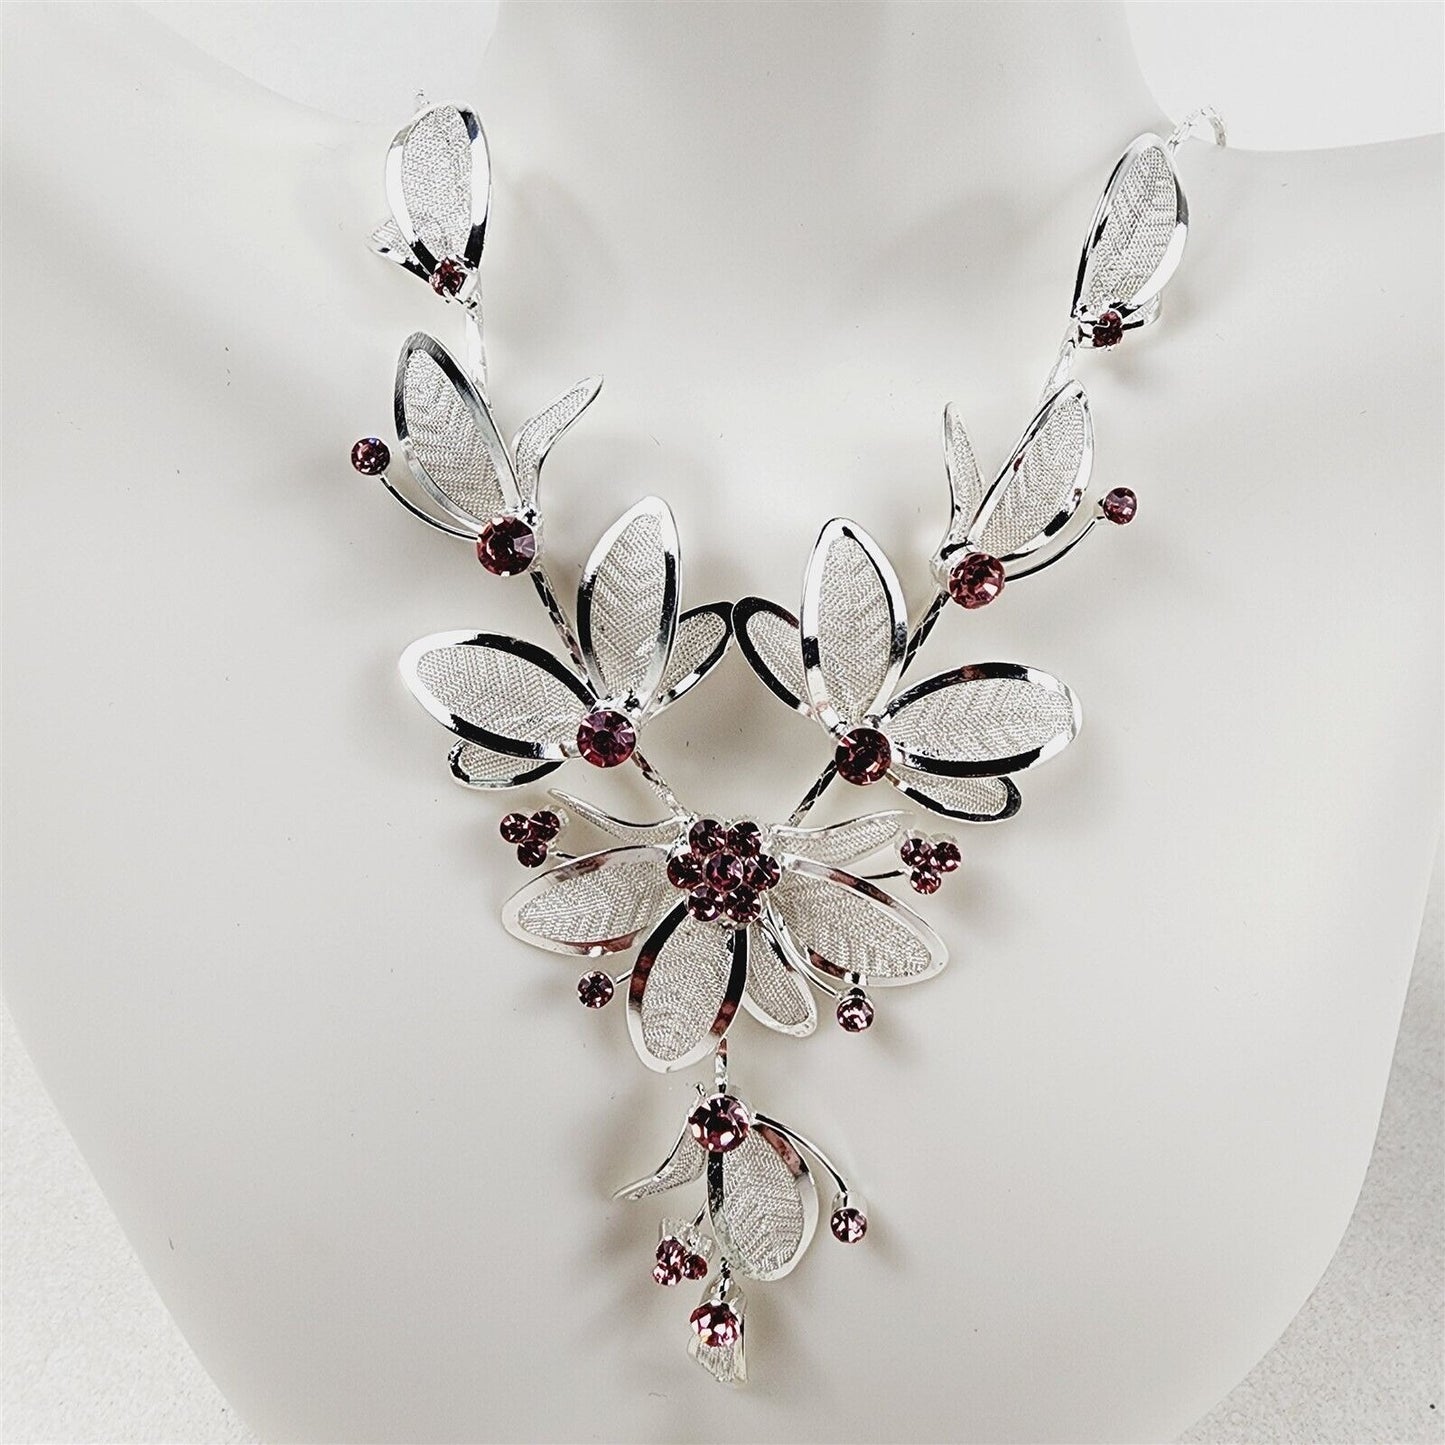 Pink Silver Mesh Floral Necklace Earrings Bracelet Fashion Jewelry Set